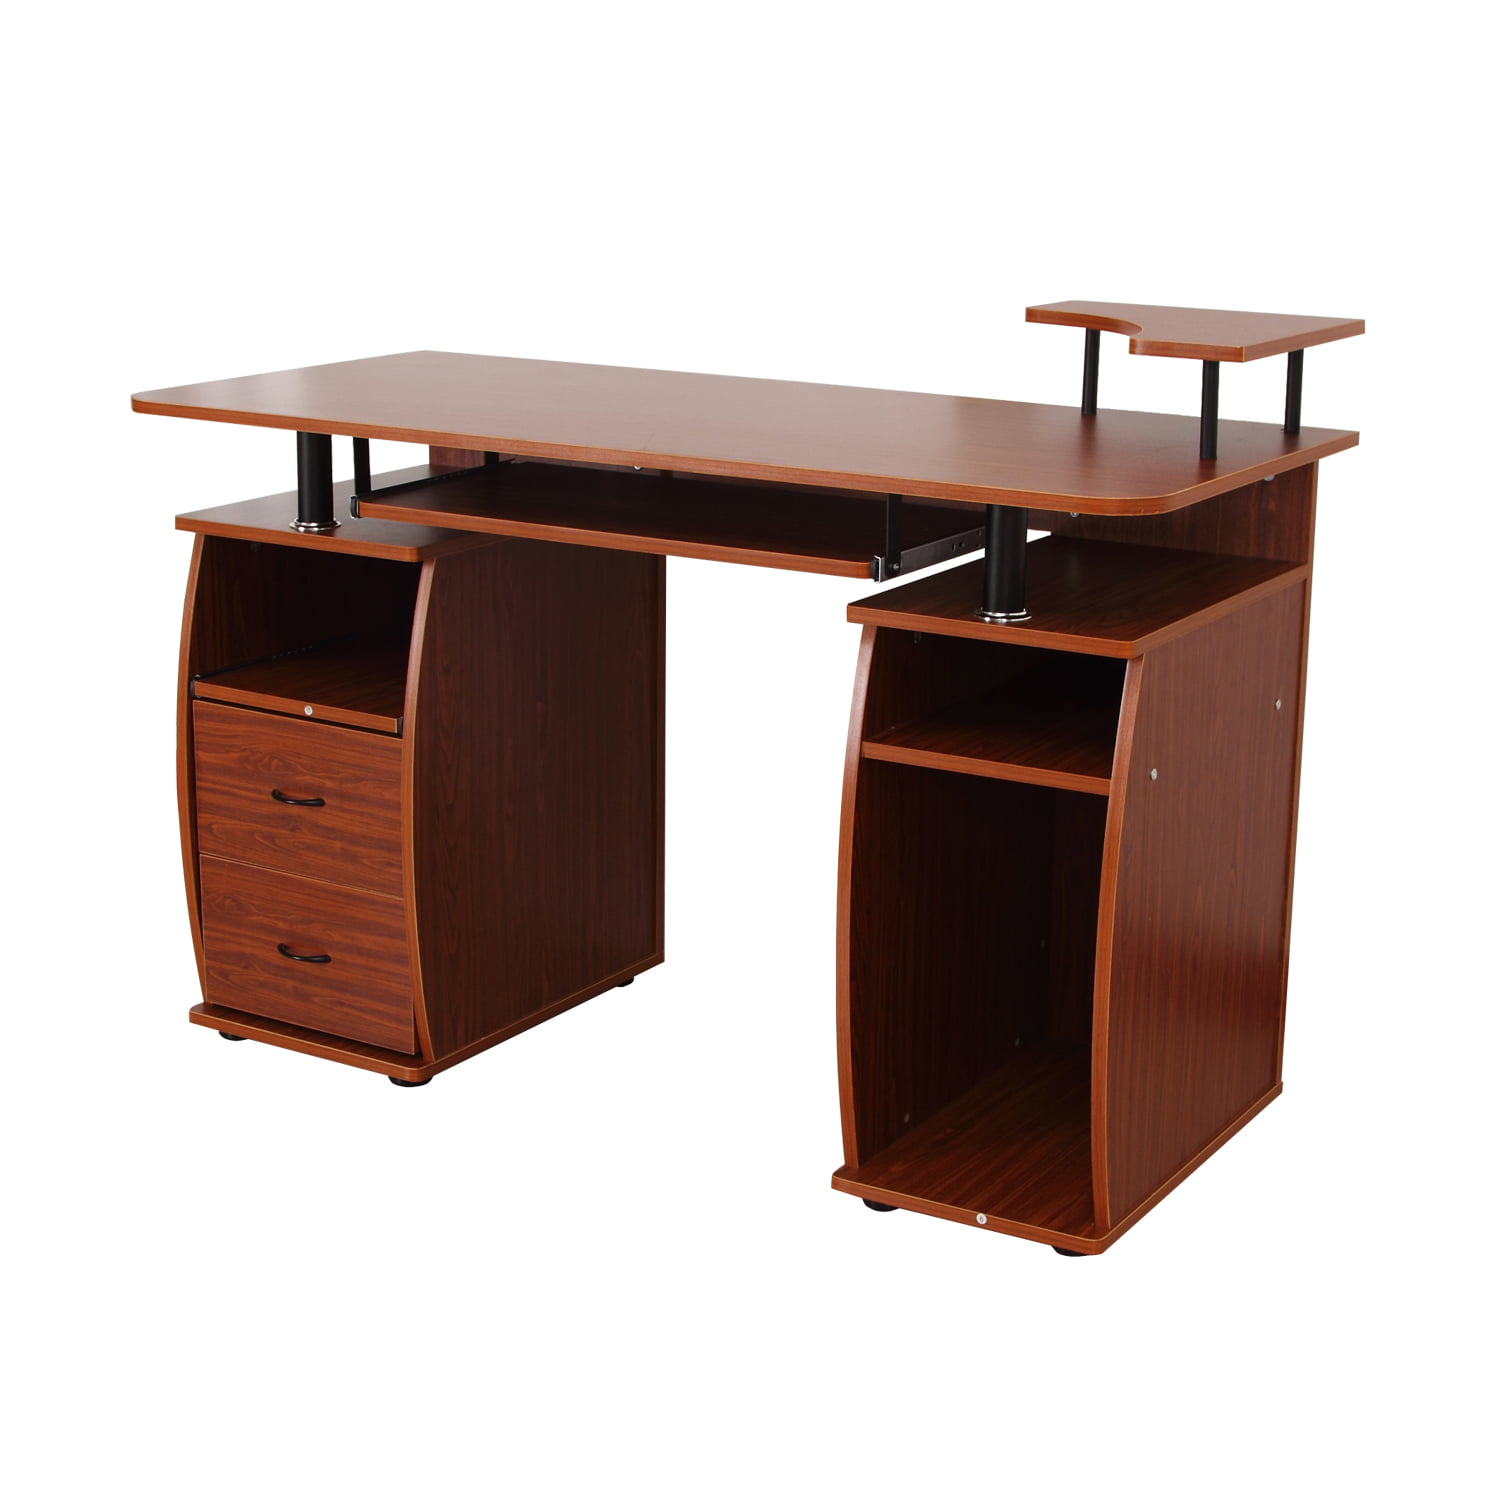 Industrial Executive Desk with Drawers and Sliding Keyboard Tray for Home Office or Commercial Office Cool Desk Computer Desk